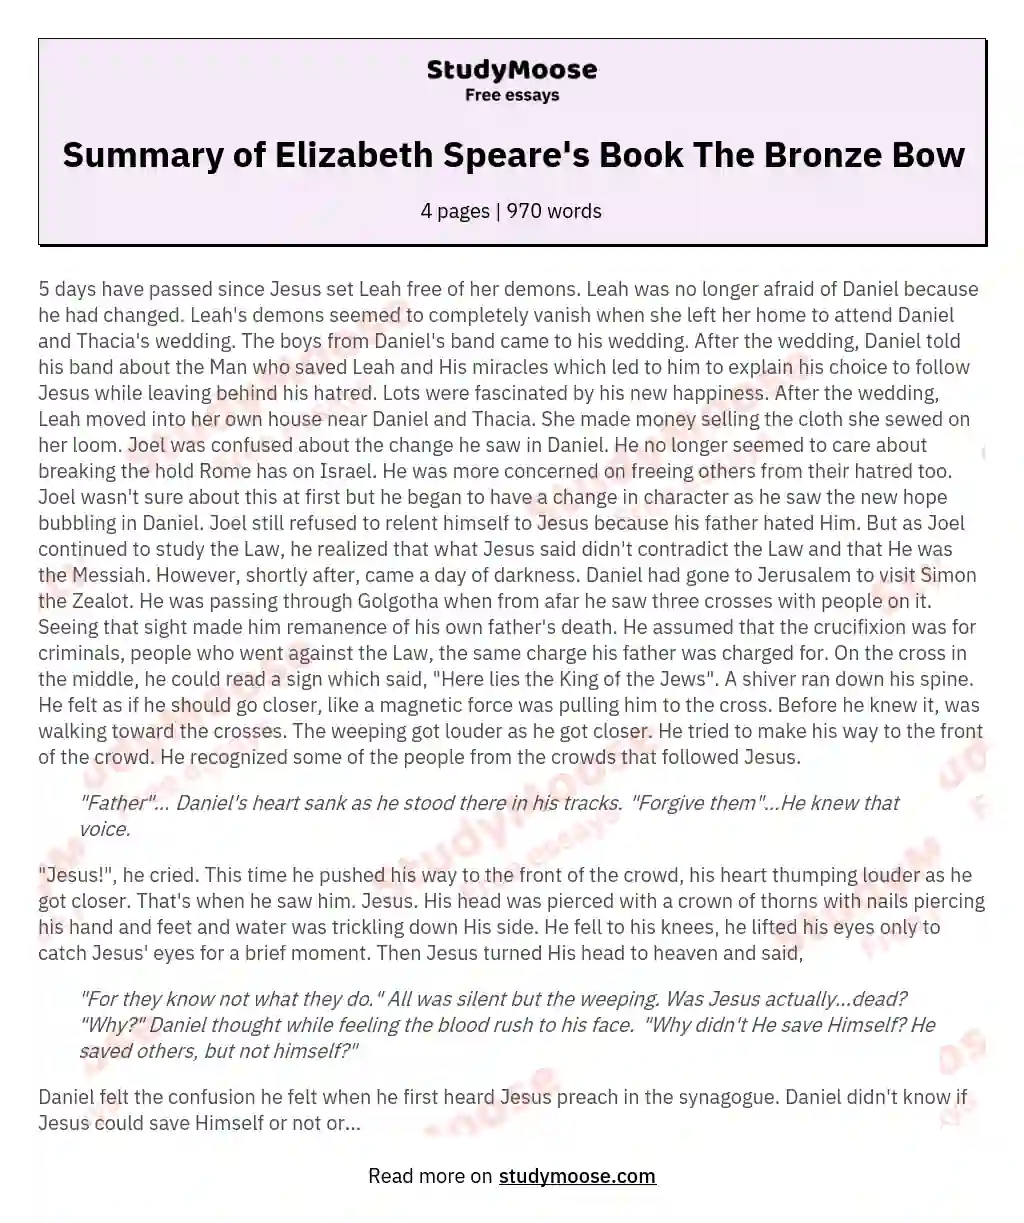 Summary of Elizabeth Speare's Book The Bronze Bow essay